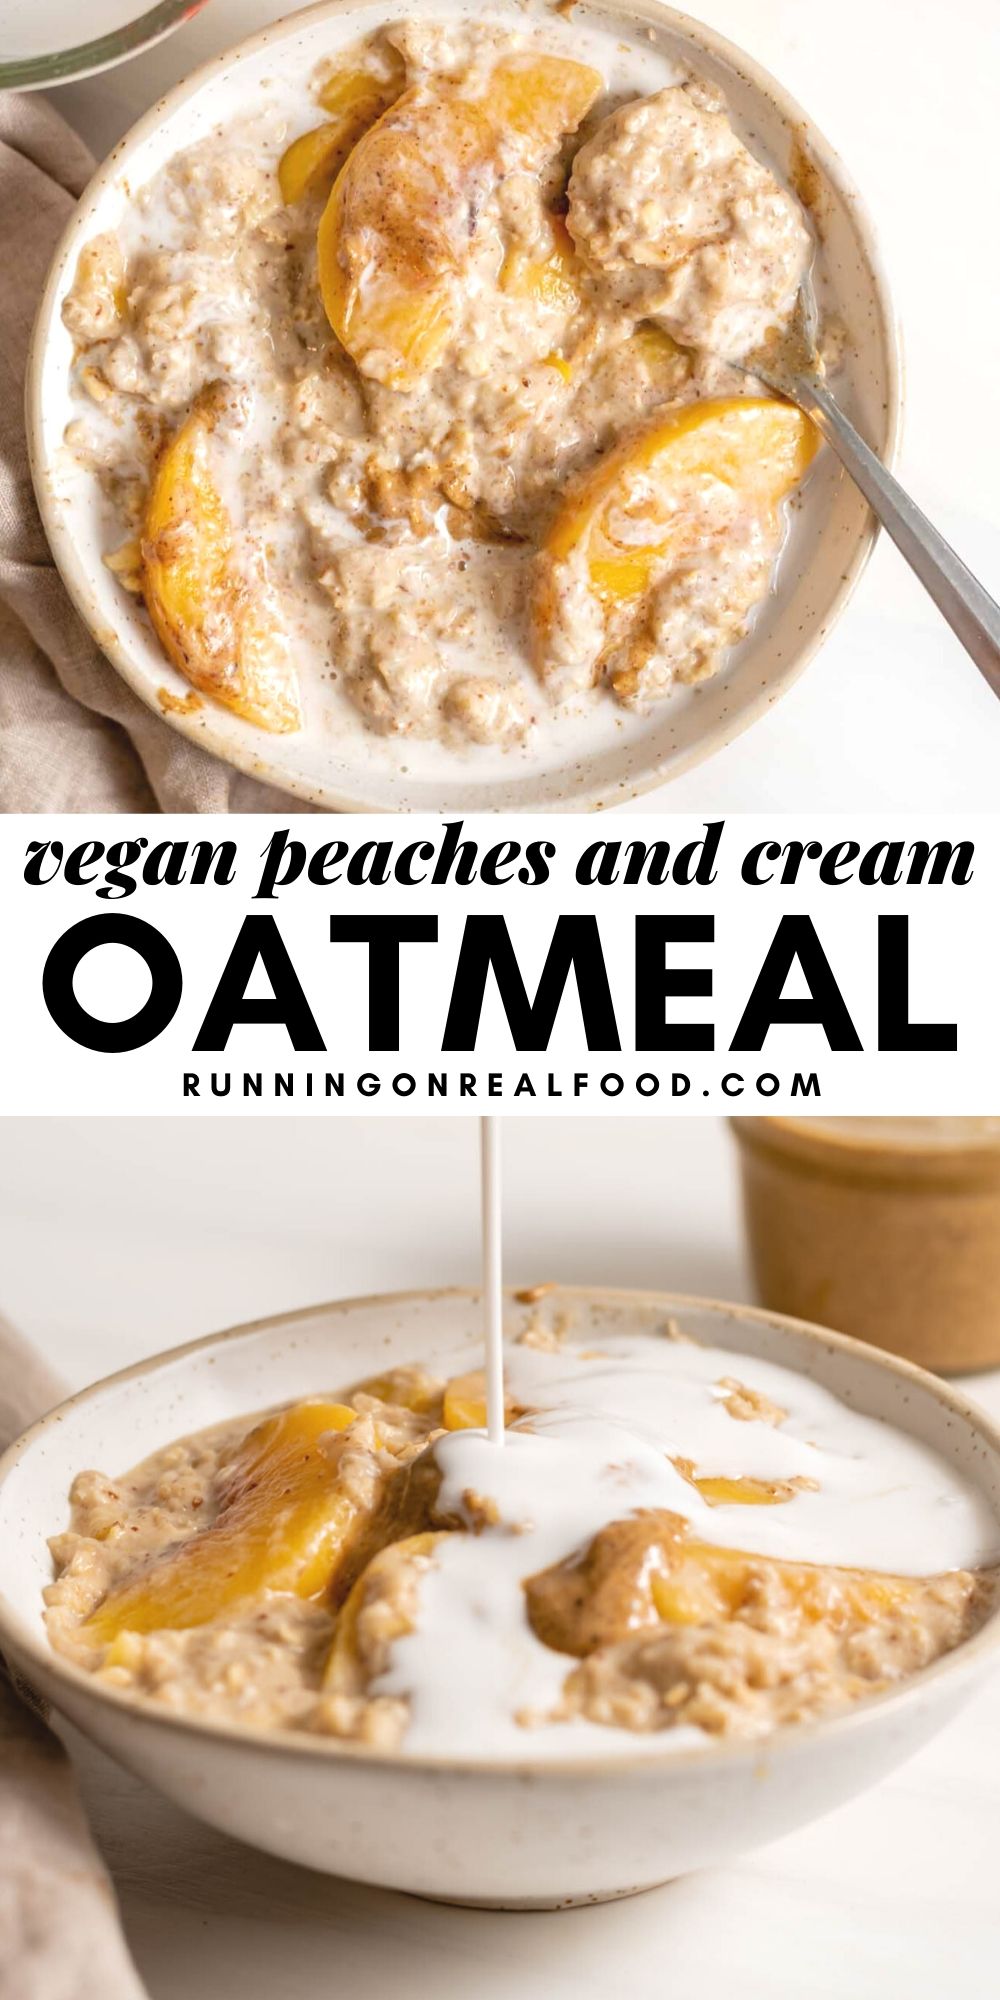 Vegan Peaches and Cream Oatmeal - Running on Real Food